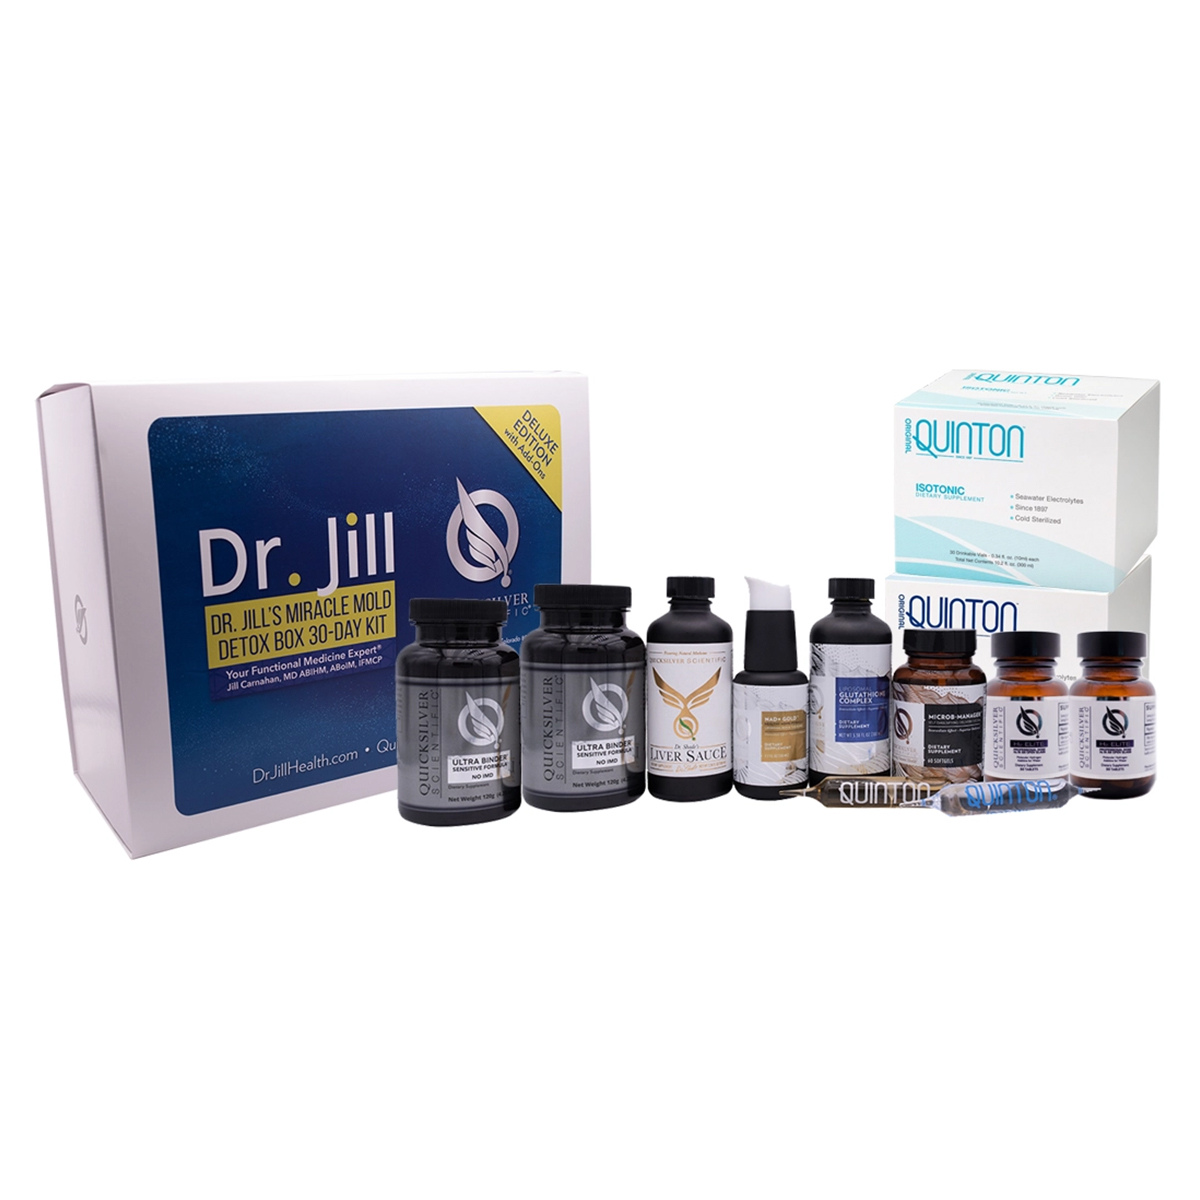 Dr. Jill's Miracle Mold Deluxe Detox Box